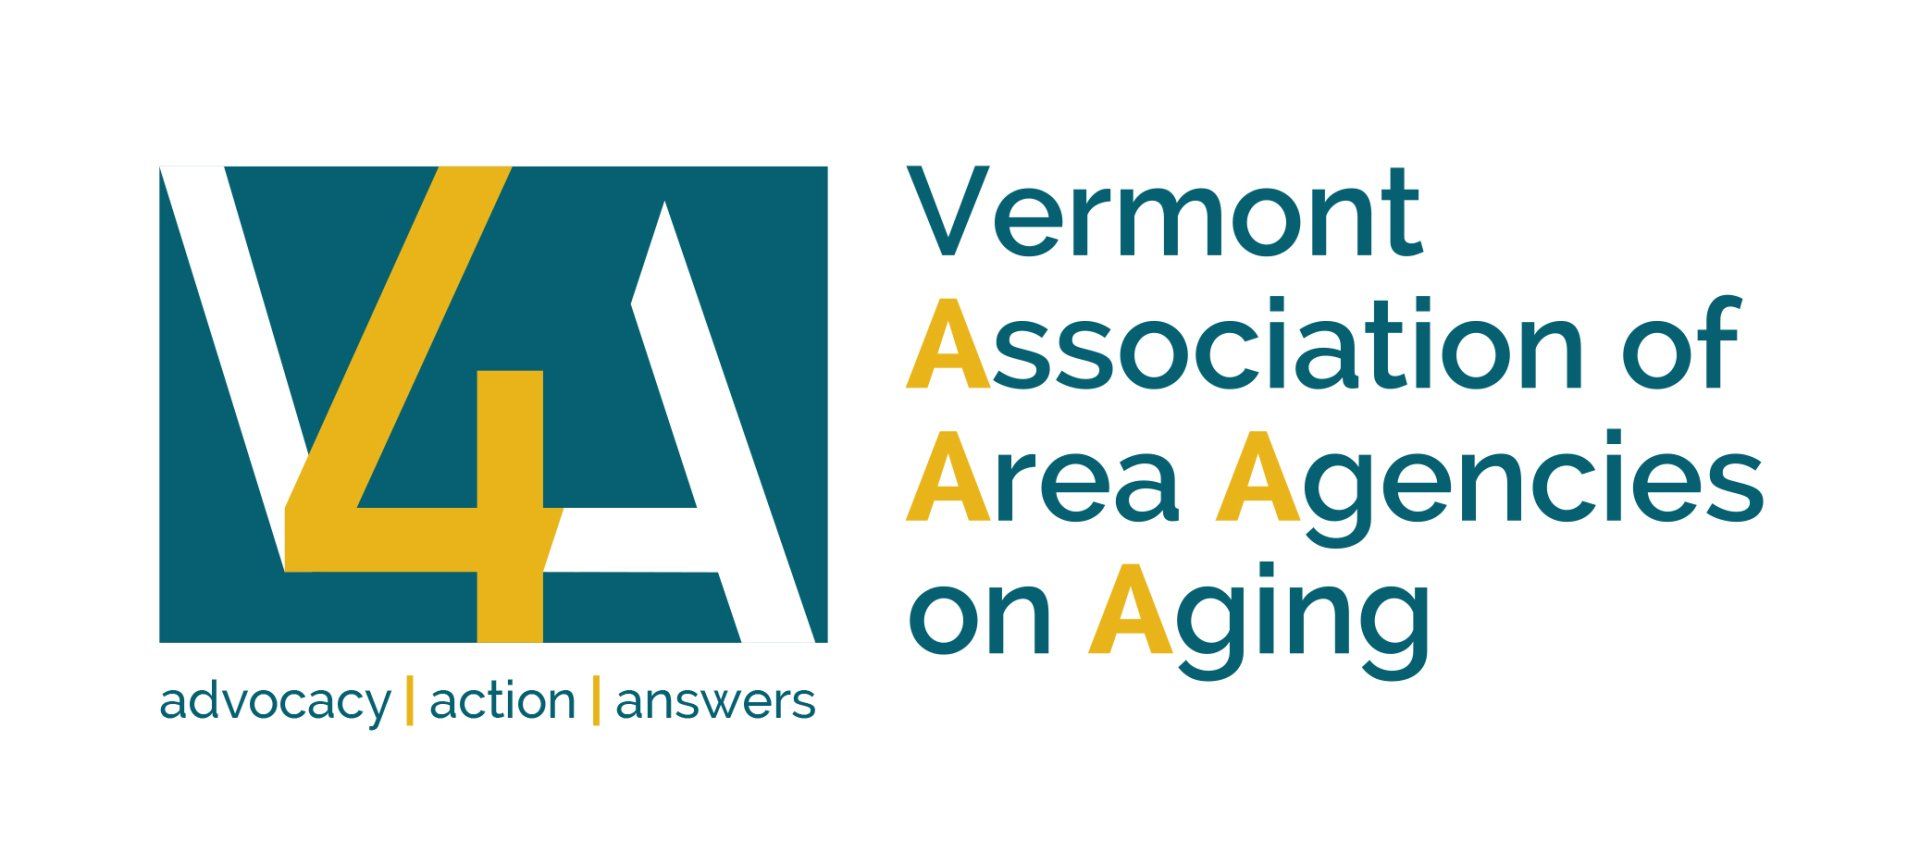 Vermont Association of Area Agencies on Aging logo